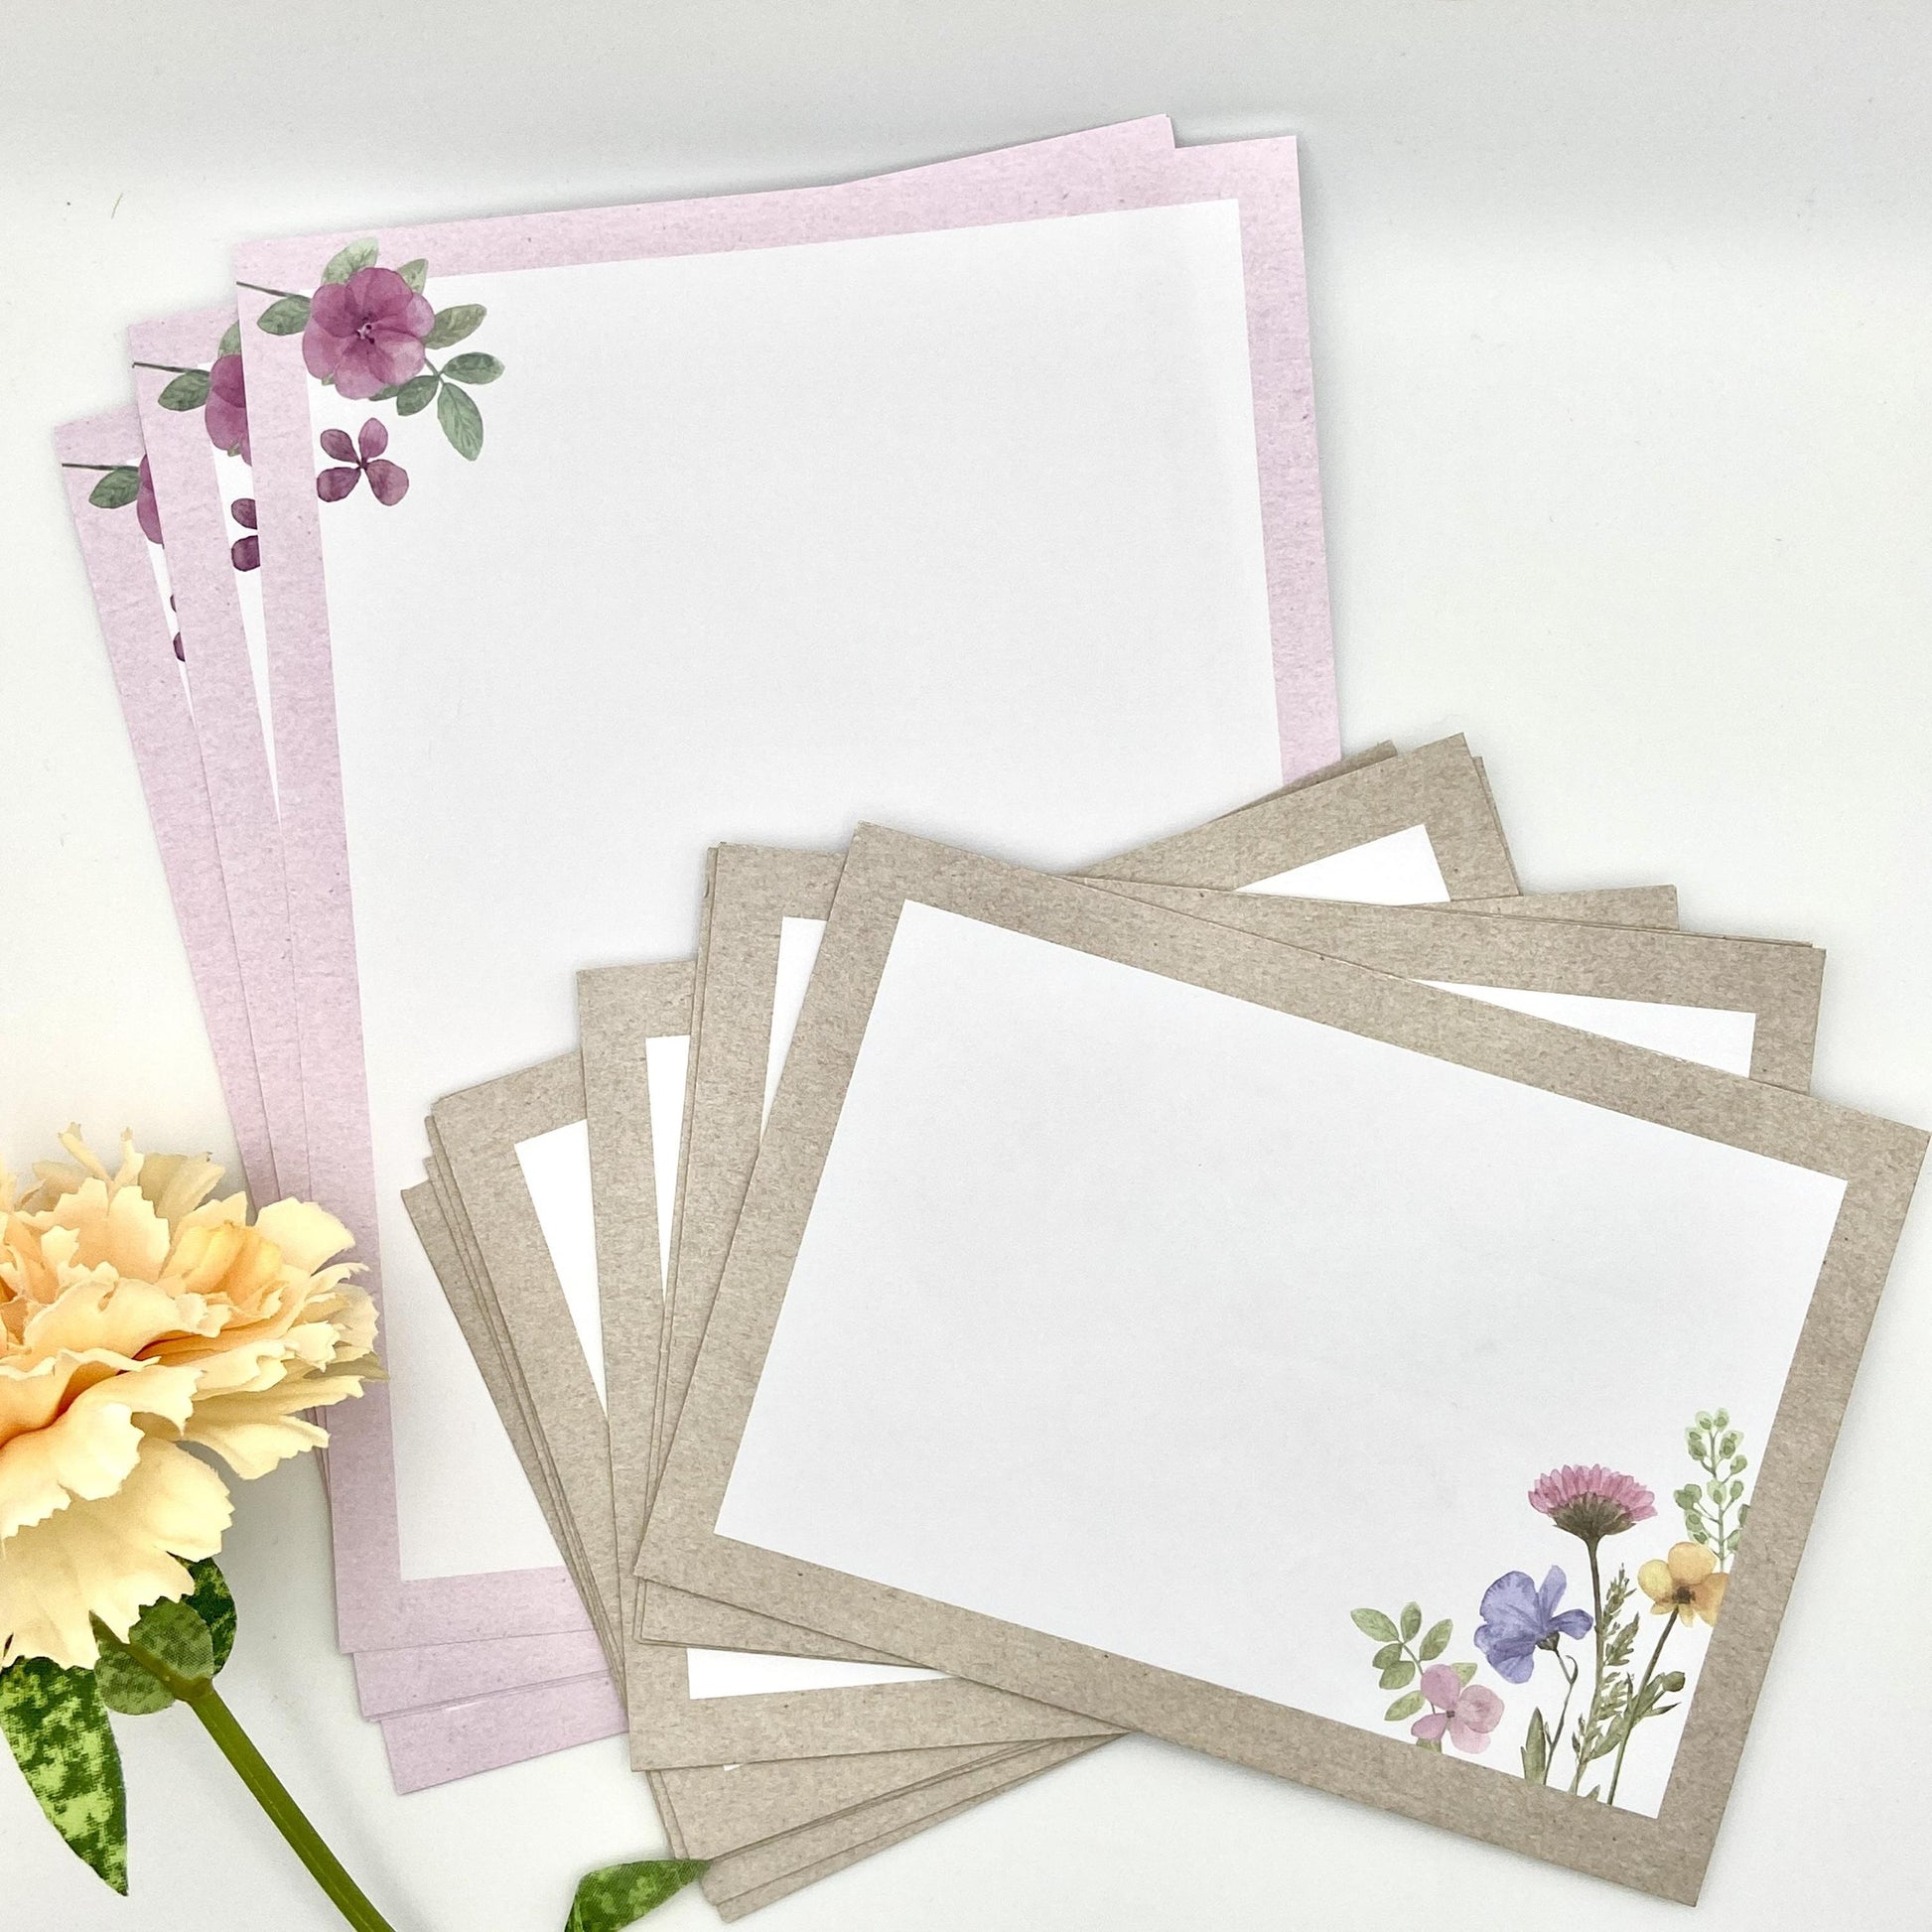 Inside Image Showing Writing Paper And Floral Envelopes